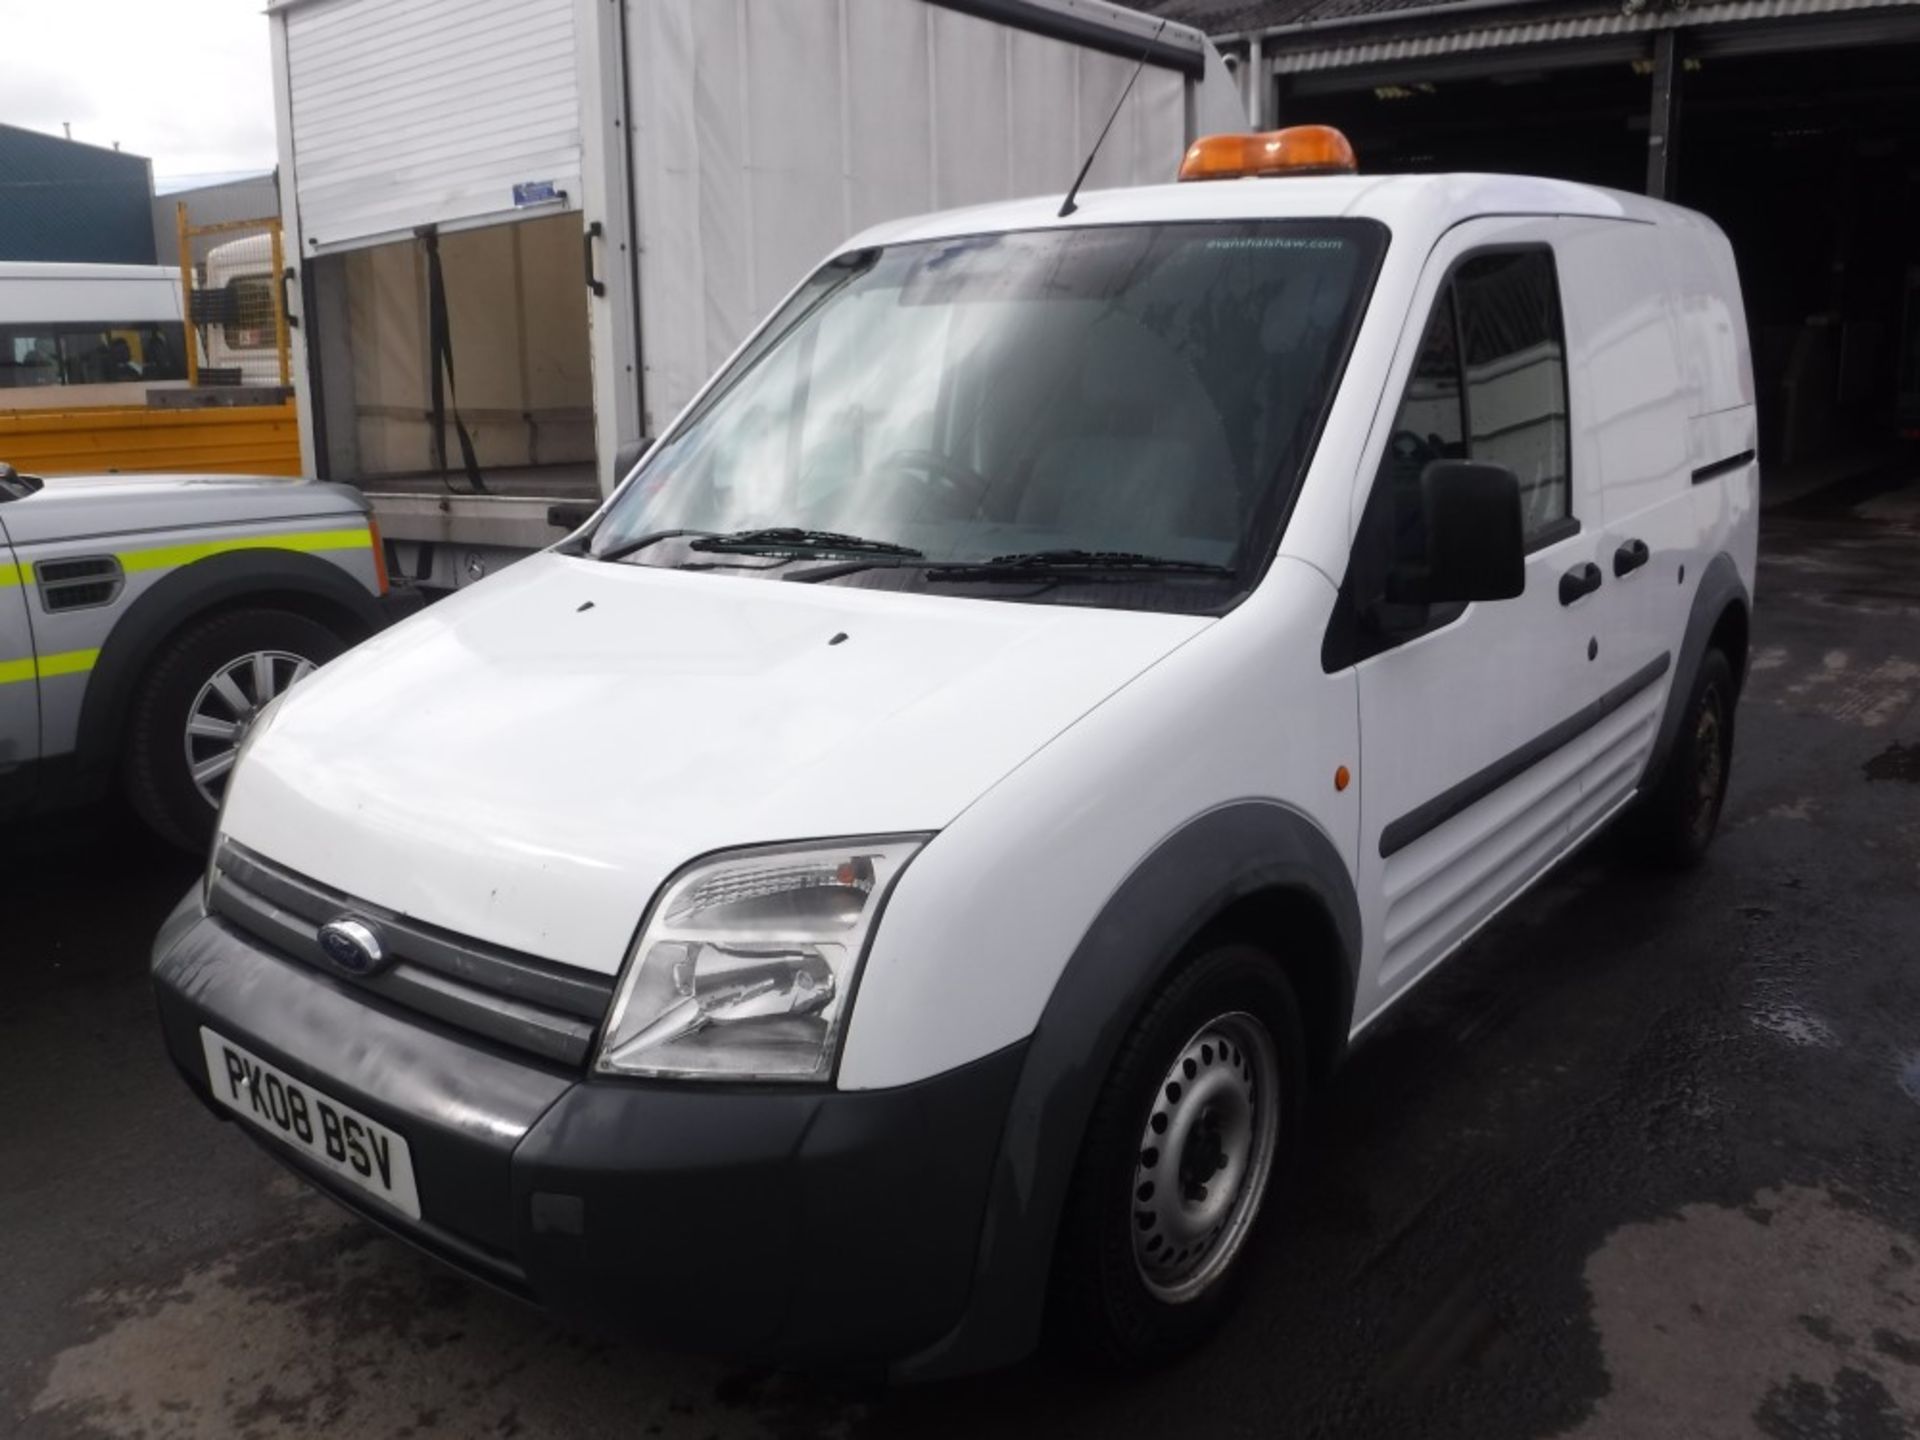 08 reg FORD TRANSIT CONNECT T200, 1ST REG 03/08, V5 HERE, 1 OWNER FROM NEW (DIRECT COUNCIL) [+ VAT] - Image 2 of 5